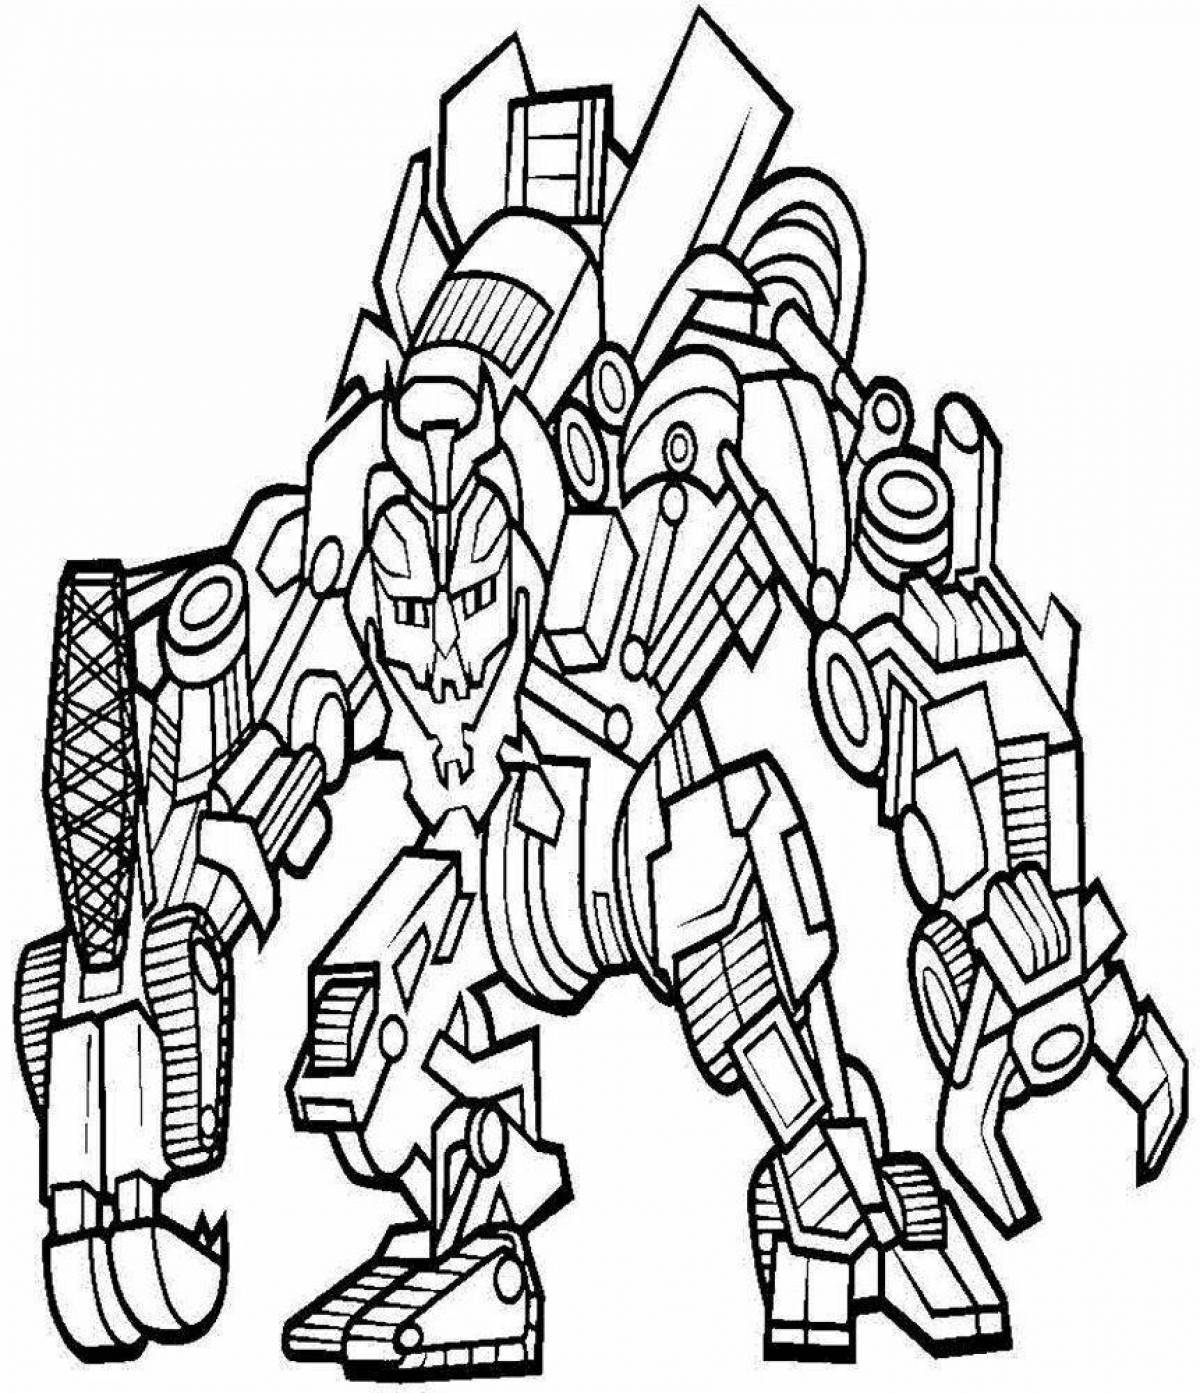 Exquisite ravager coloring page